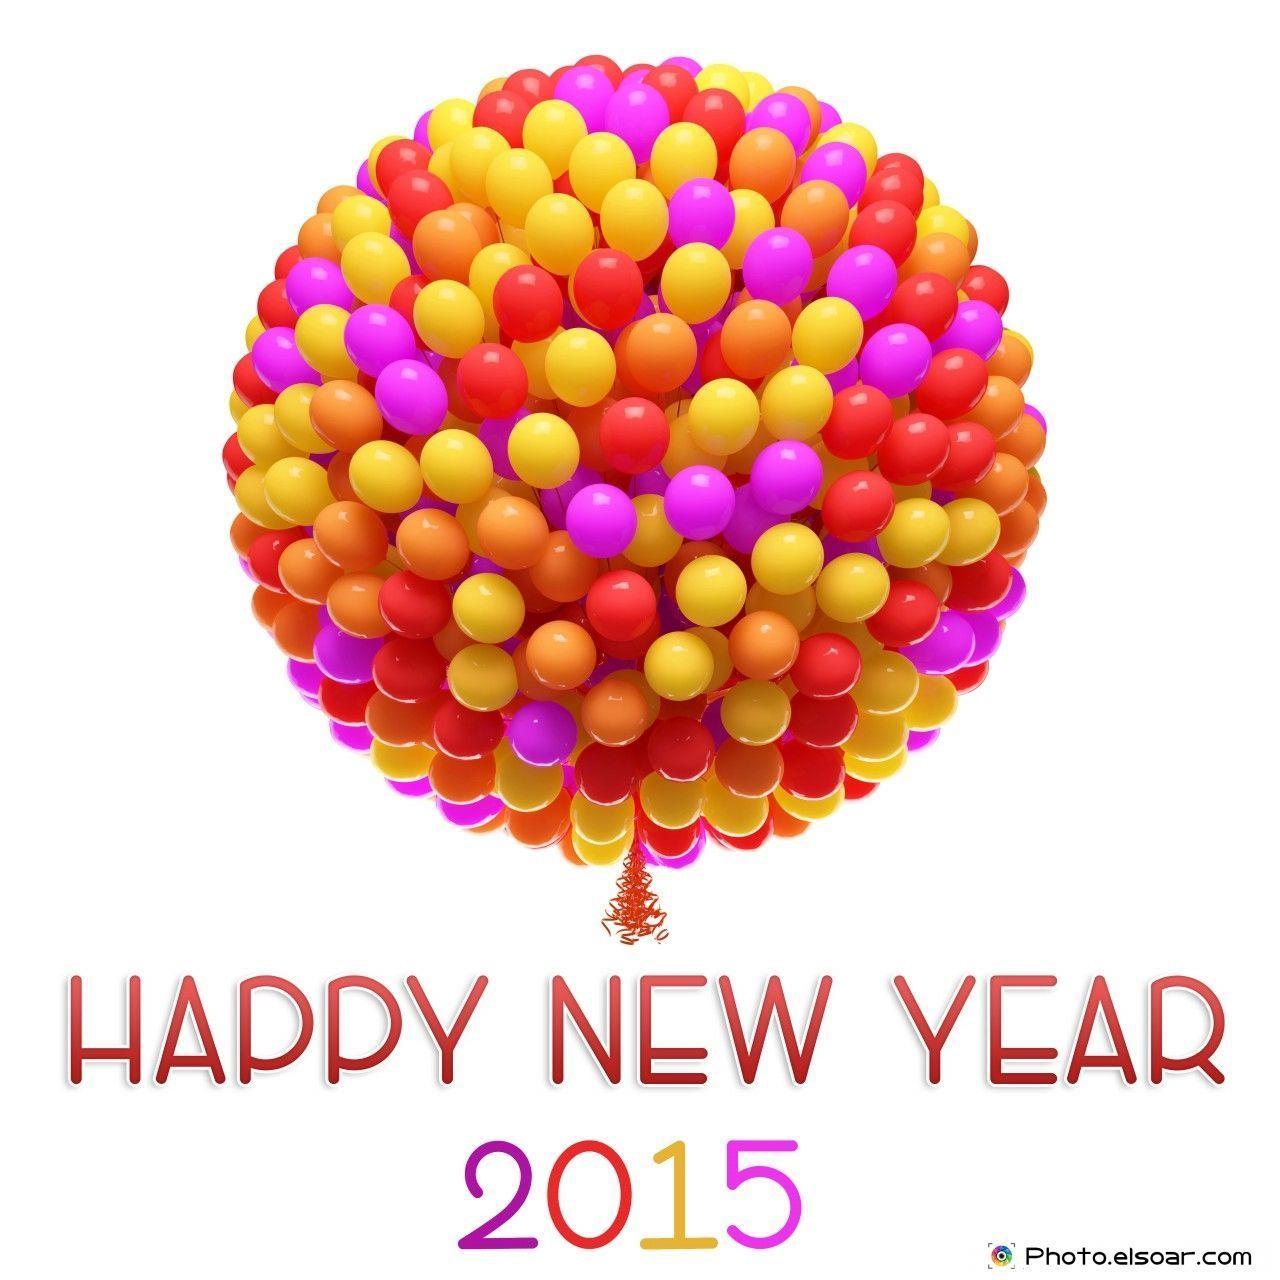 Happy New Year 2015 Funny Wallpaper Image Free Download